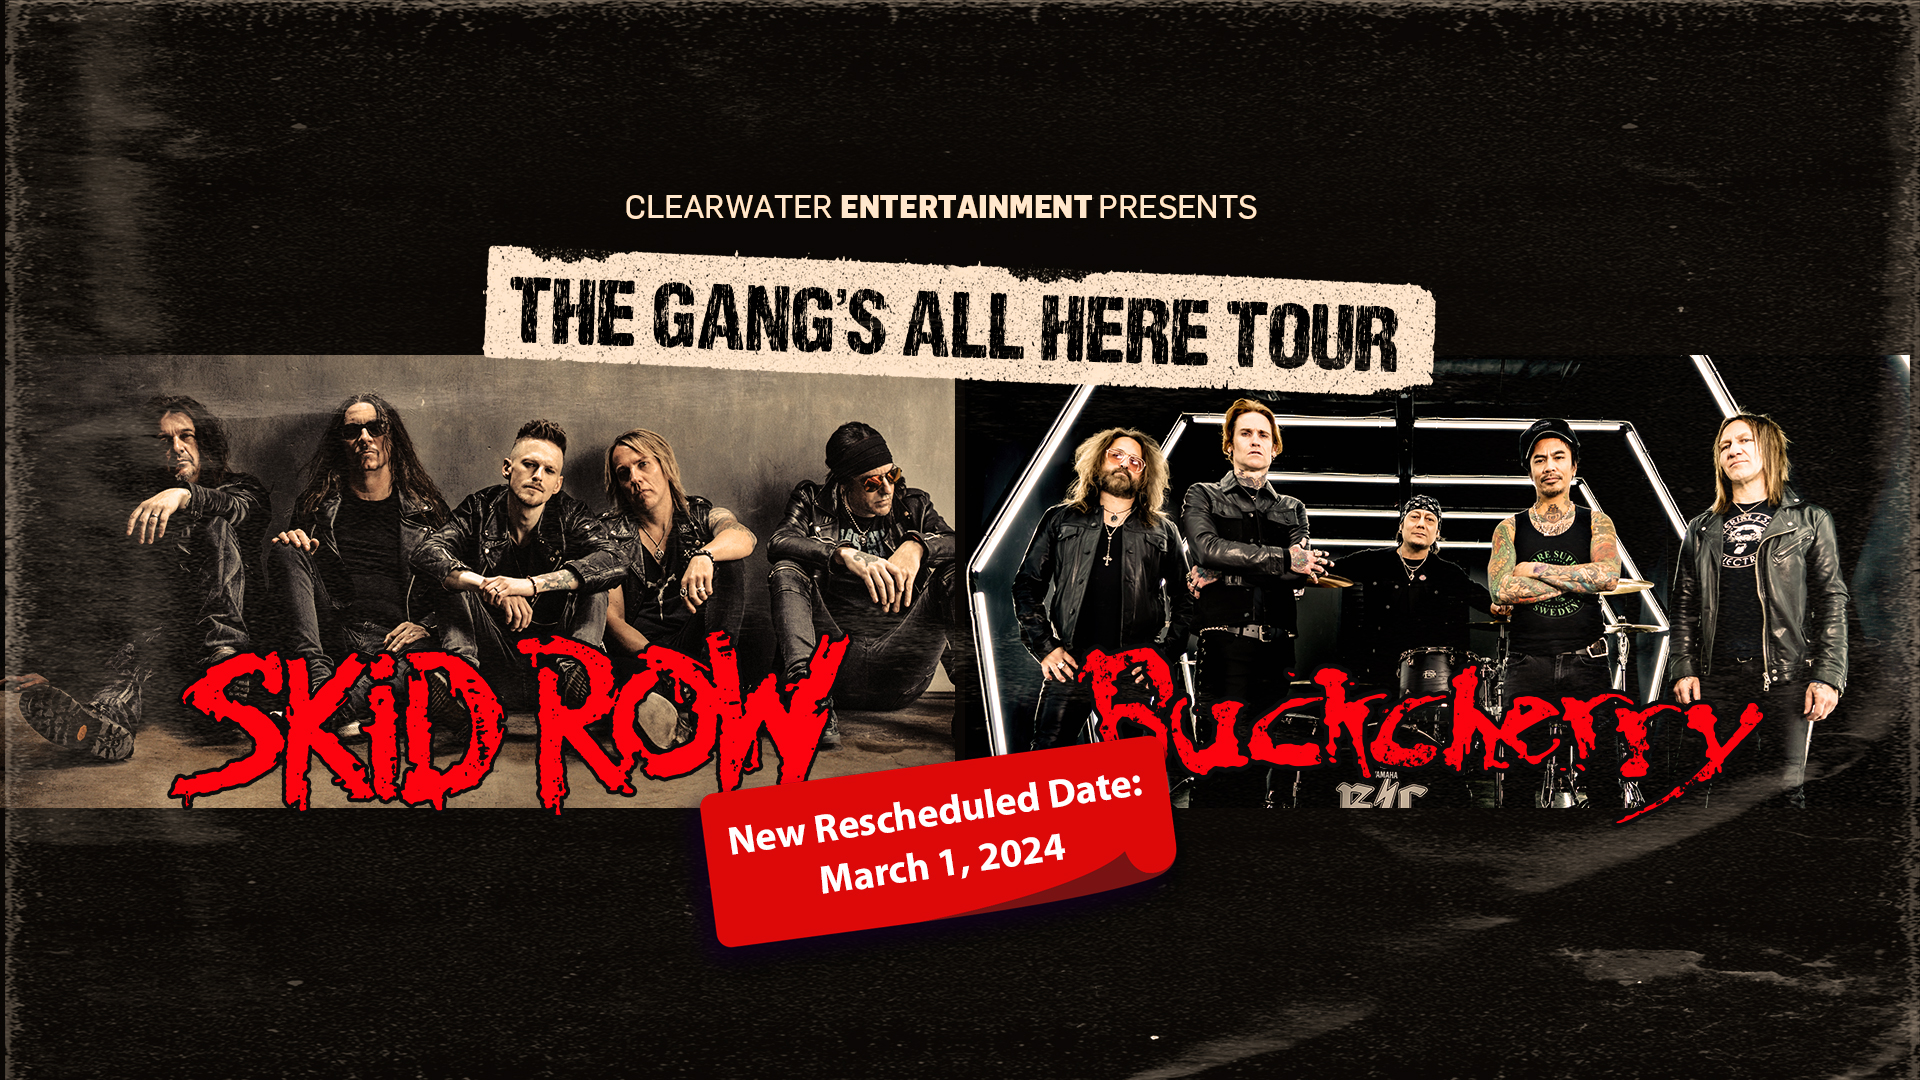 The Gang’s All Here Tour Skid Row, Buckcherry – New Date March 1st